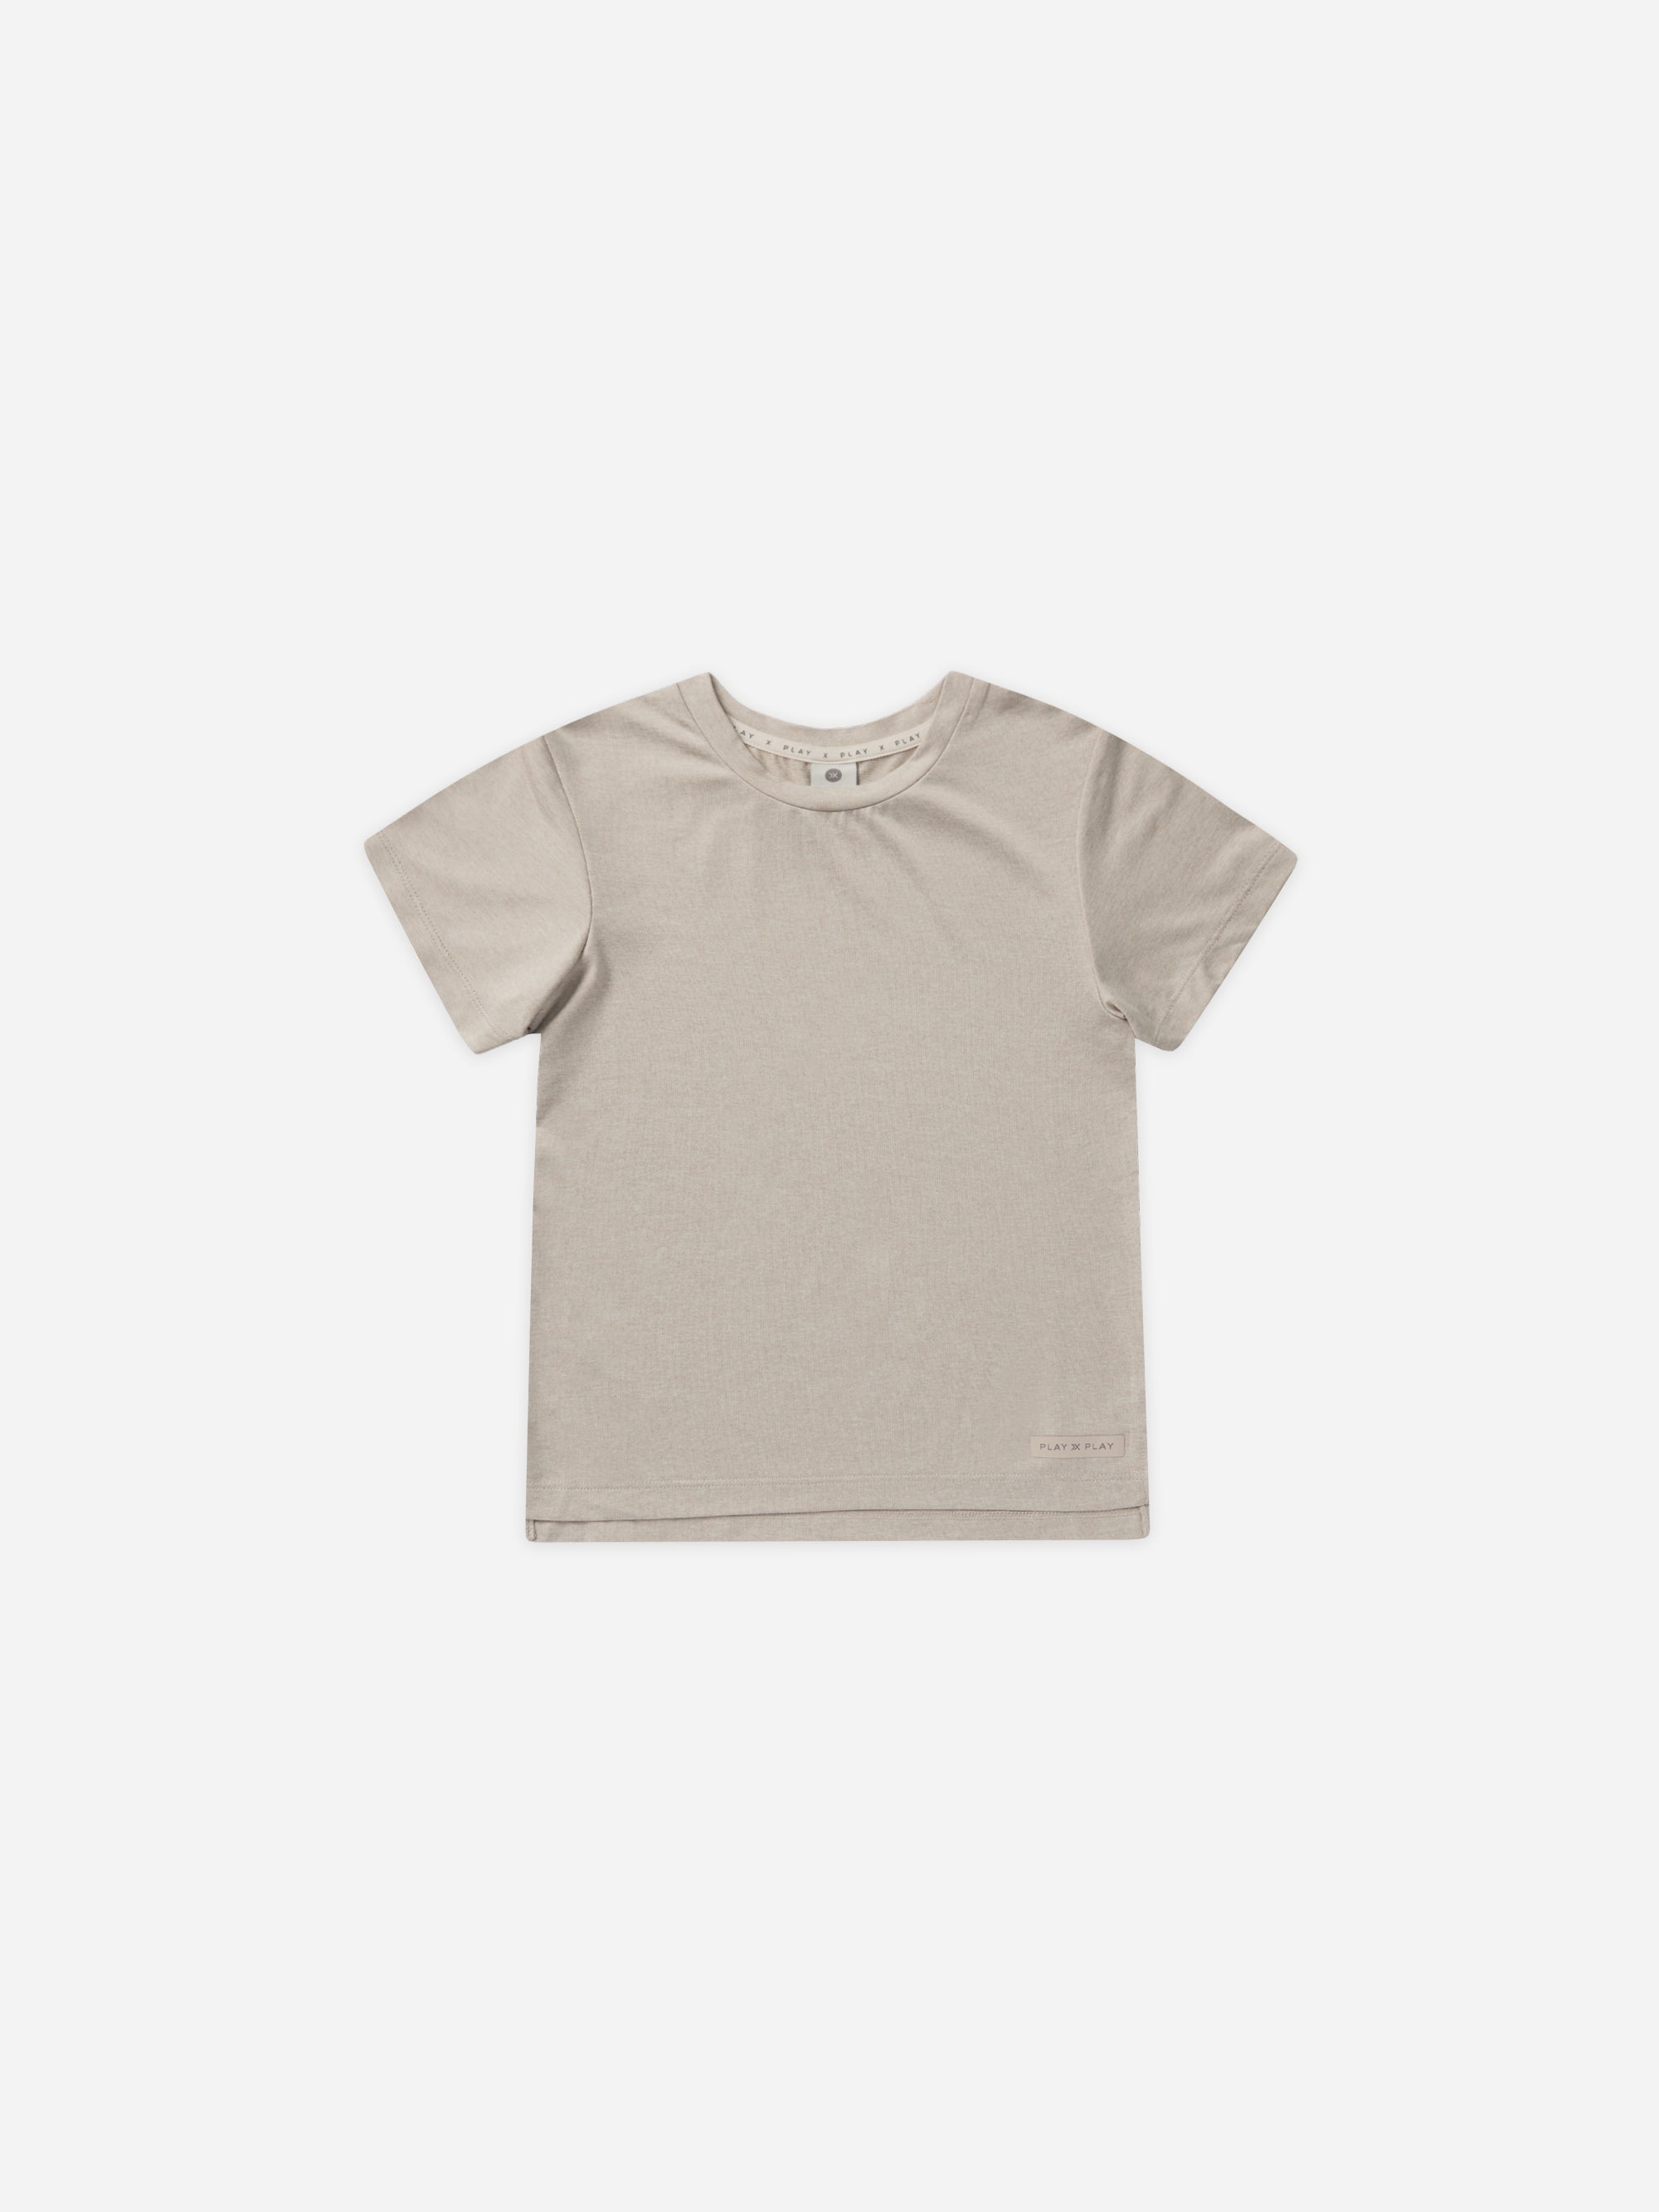 Cove Essential Tee || Heathered Dove - Rylee + Cru | Kids Clothes | Trendy Baby Clothes | Modern Infant Outfits |